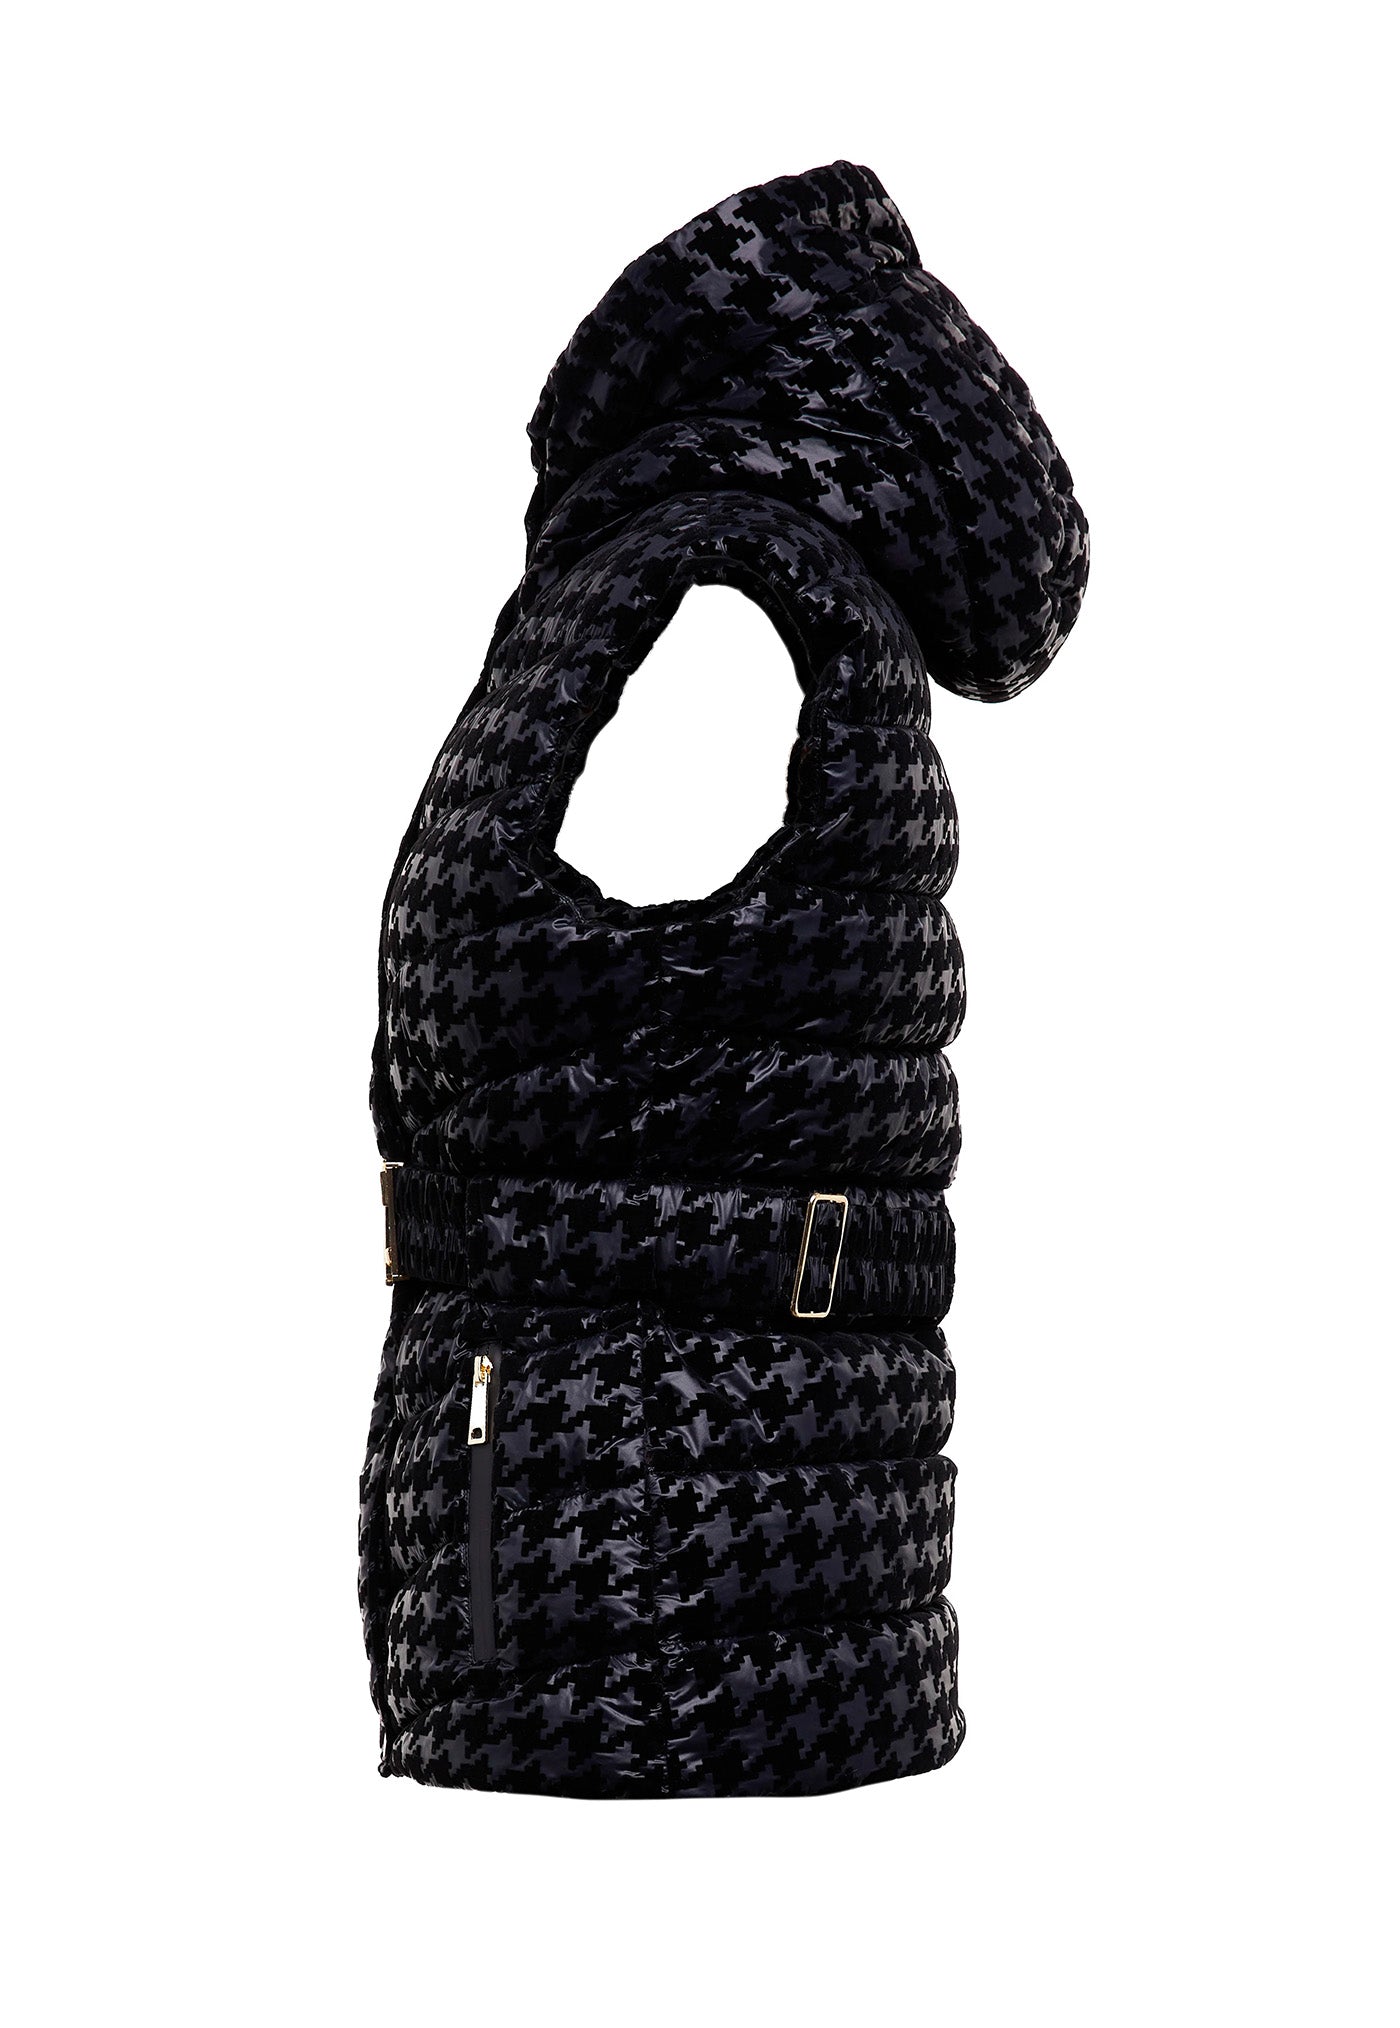 Vermont Gilet Mono Houndstooth sold by Angel Divine